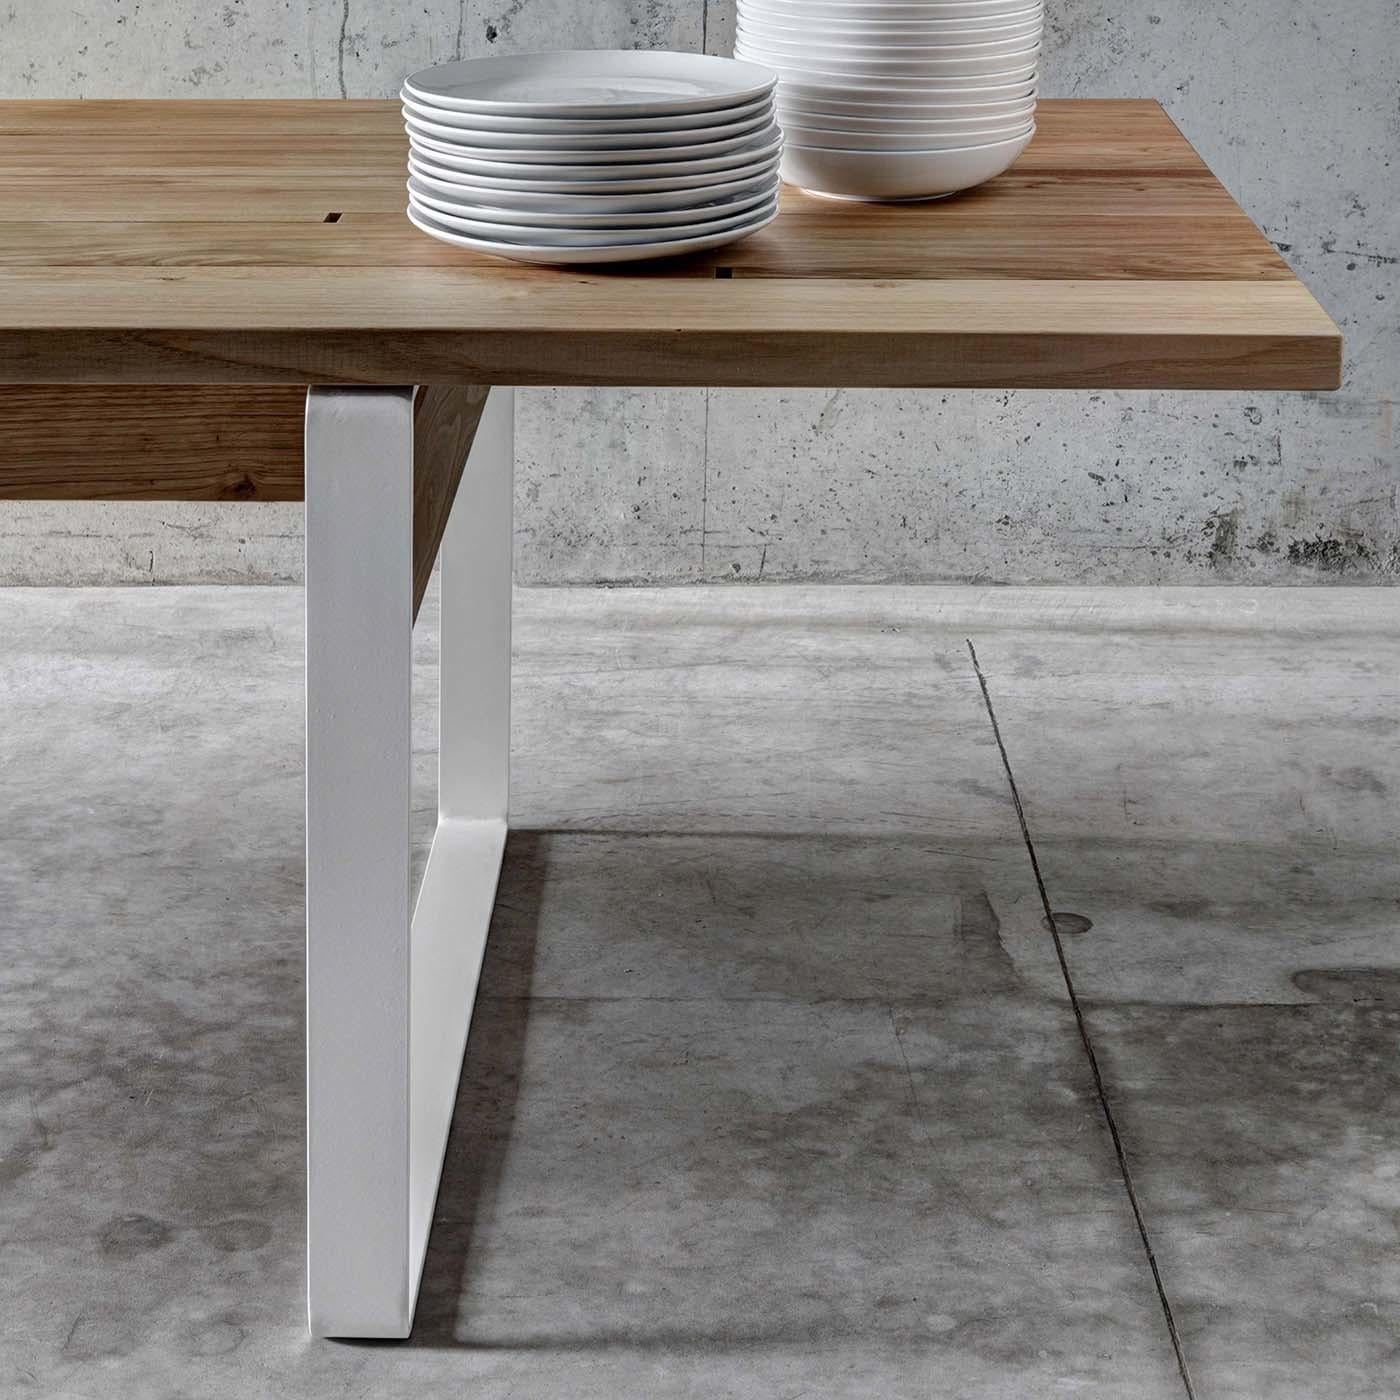 A stunning table that combines the natural elegance of wood and the sleekness of steel, this piece will have a great visual impact in a contemporary dining room or an industrial study. It was designed by Act_Romegialli with a top in chestnut, made